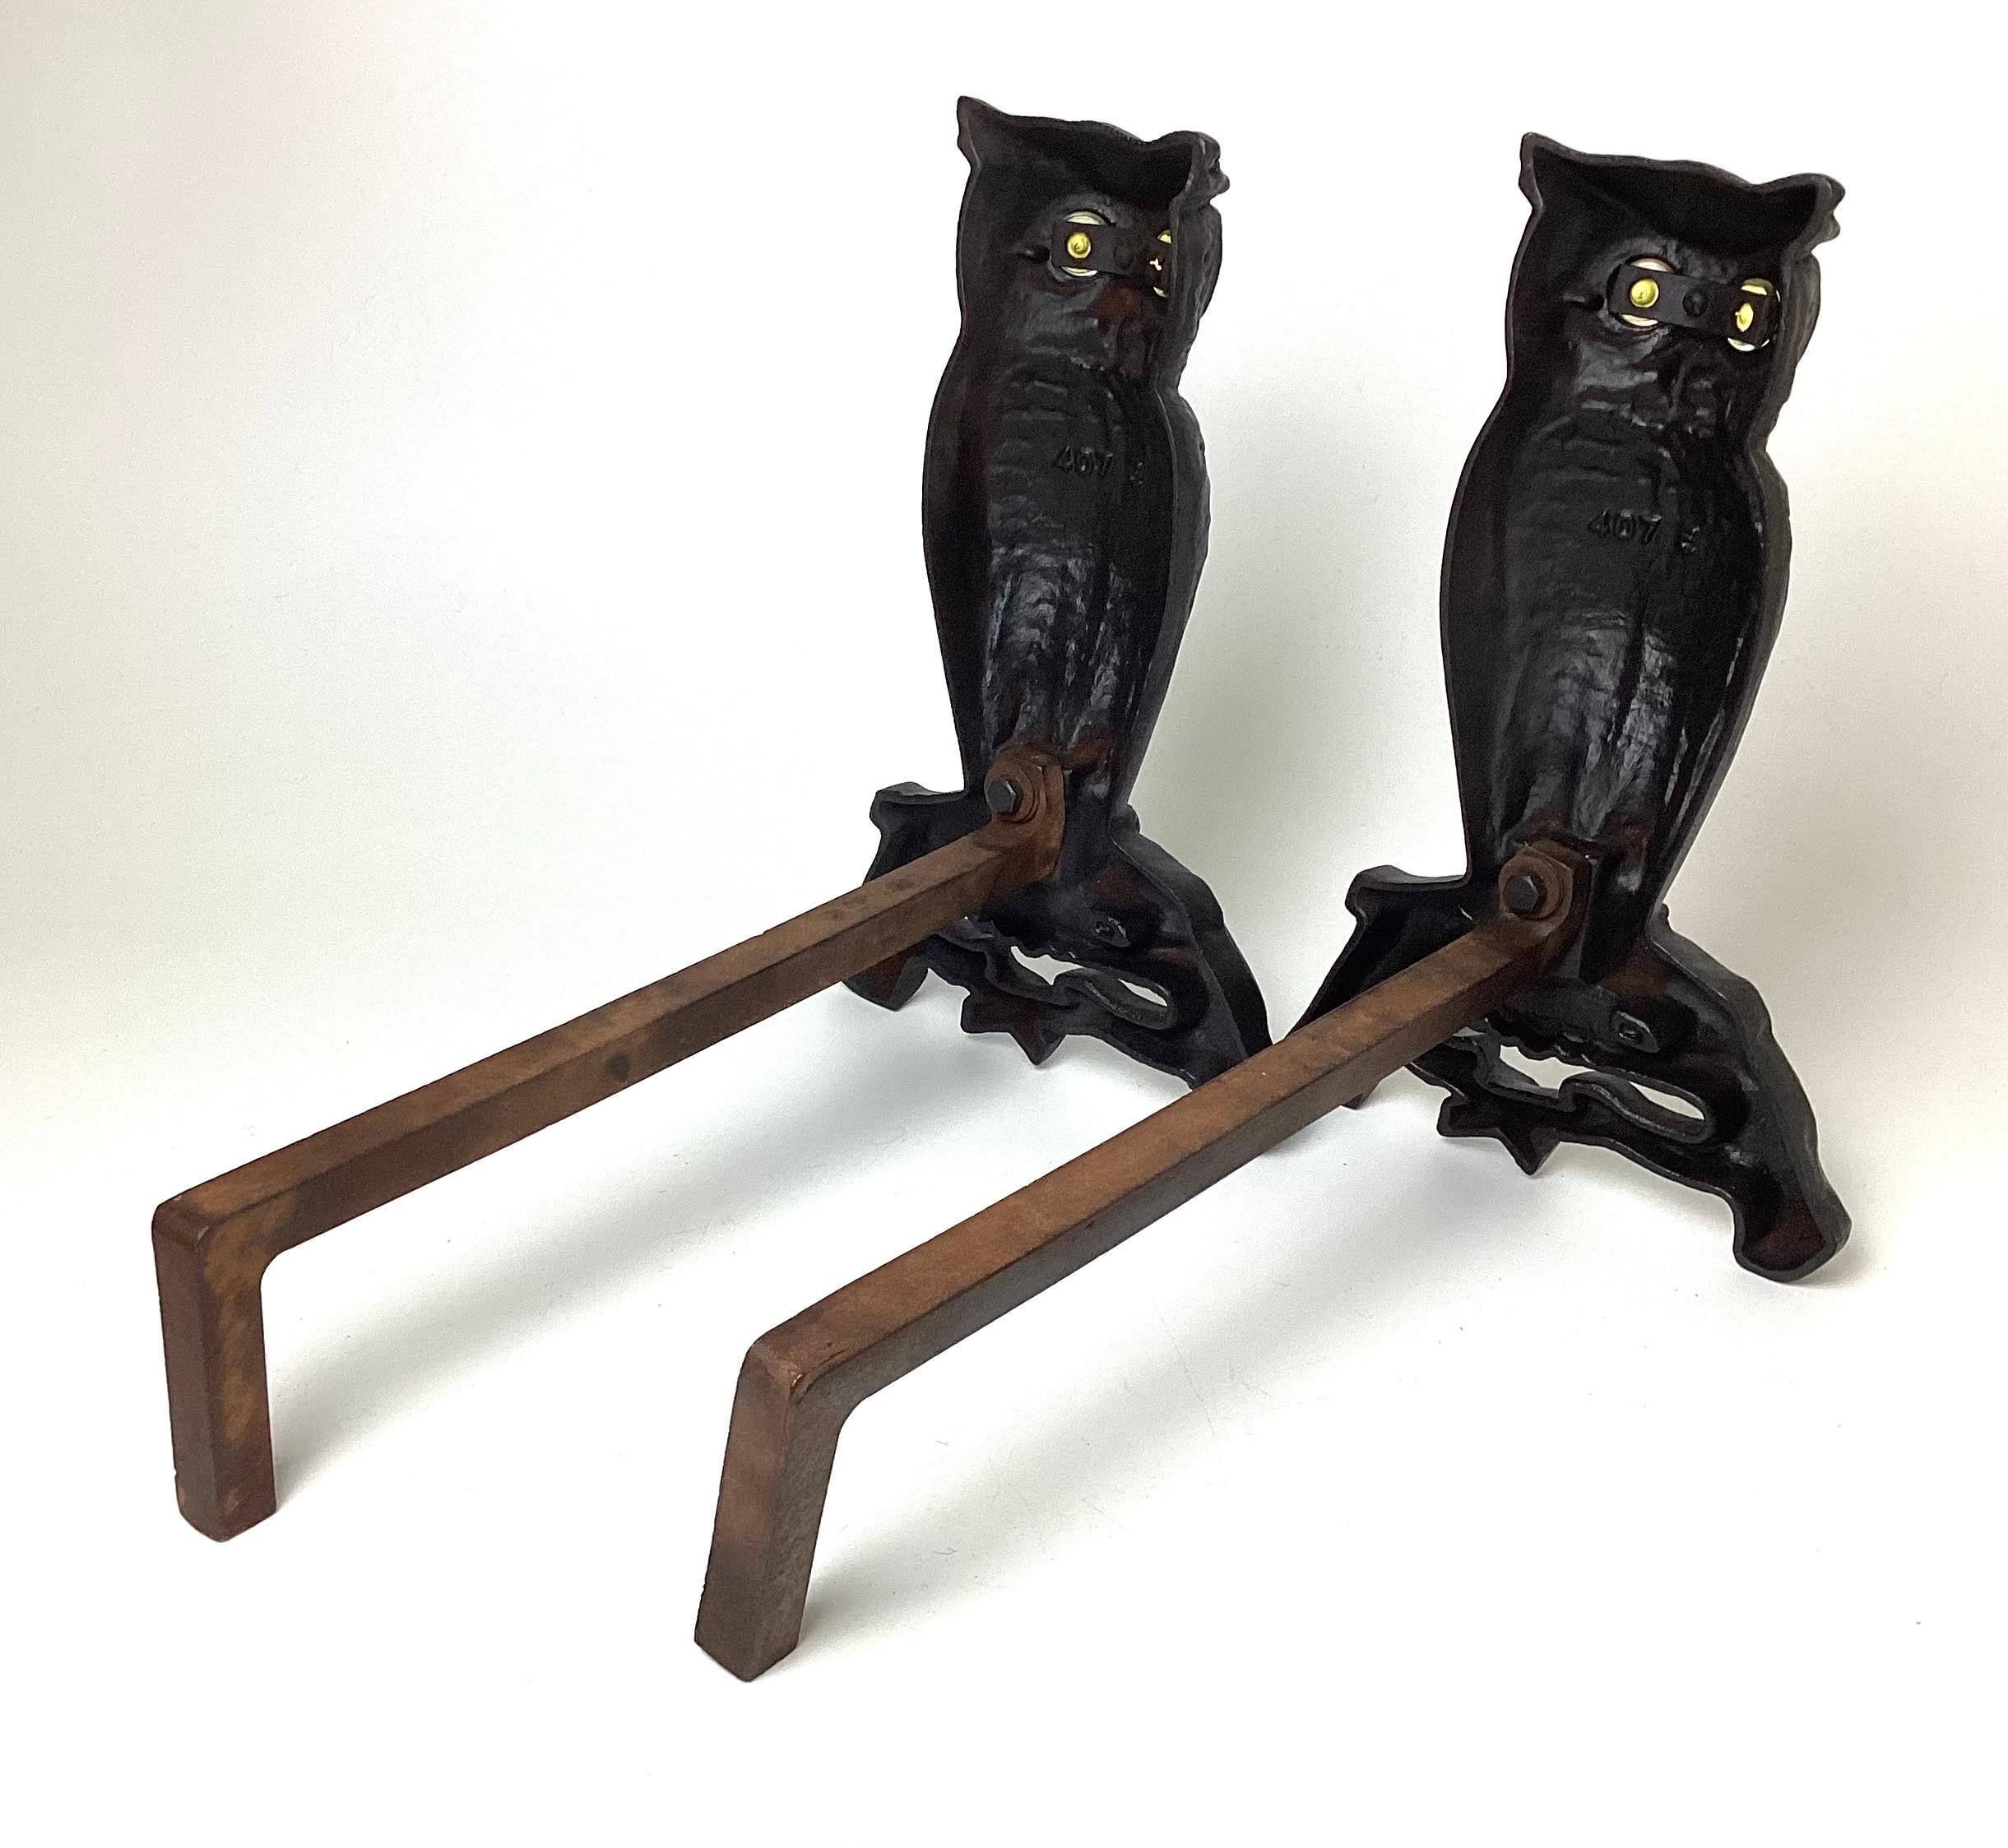 antique owl andirons with glass eyes